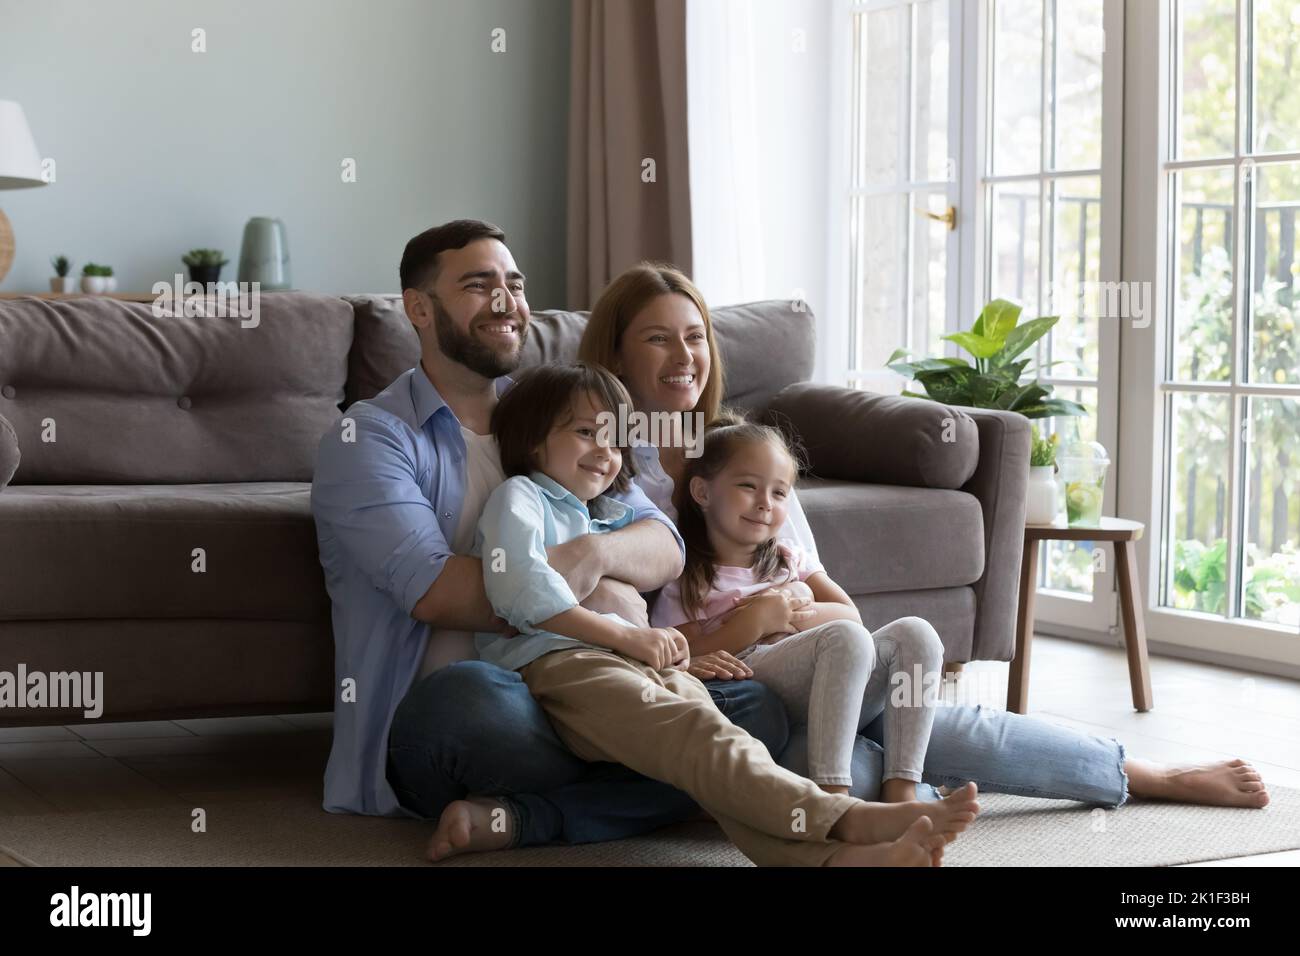 Cheerful Caucasian parents and boy and girl resting on floor Stock Photo